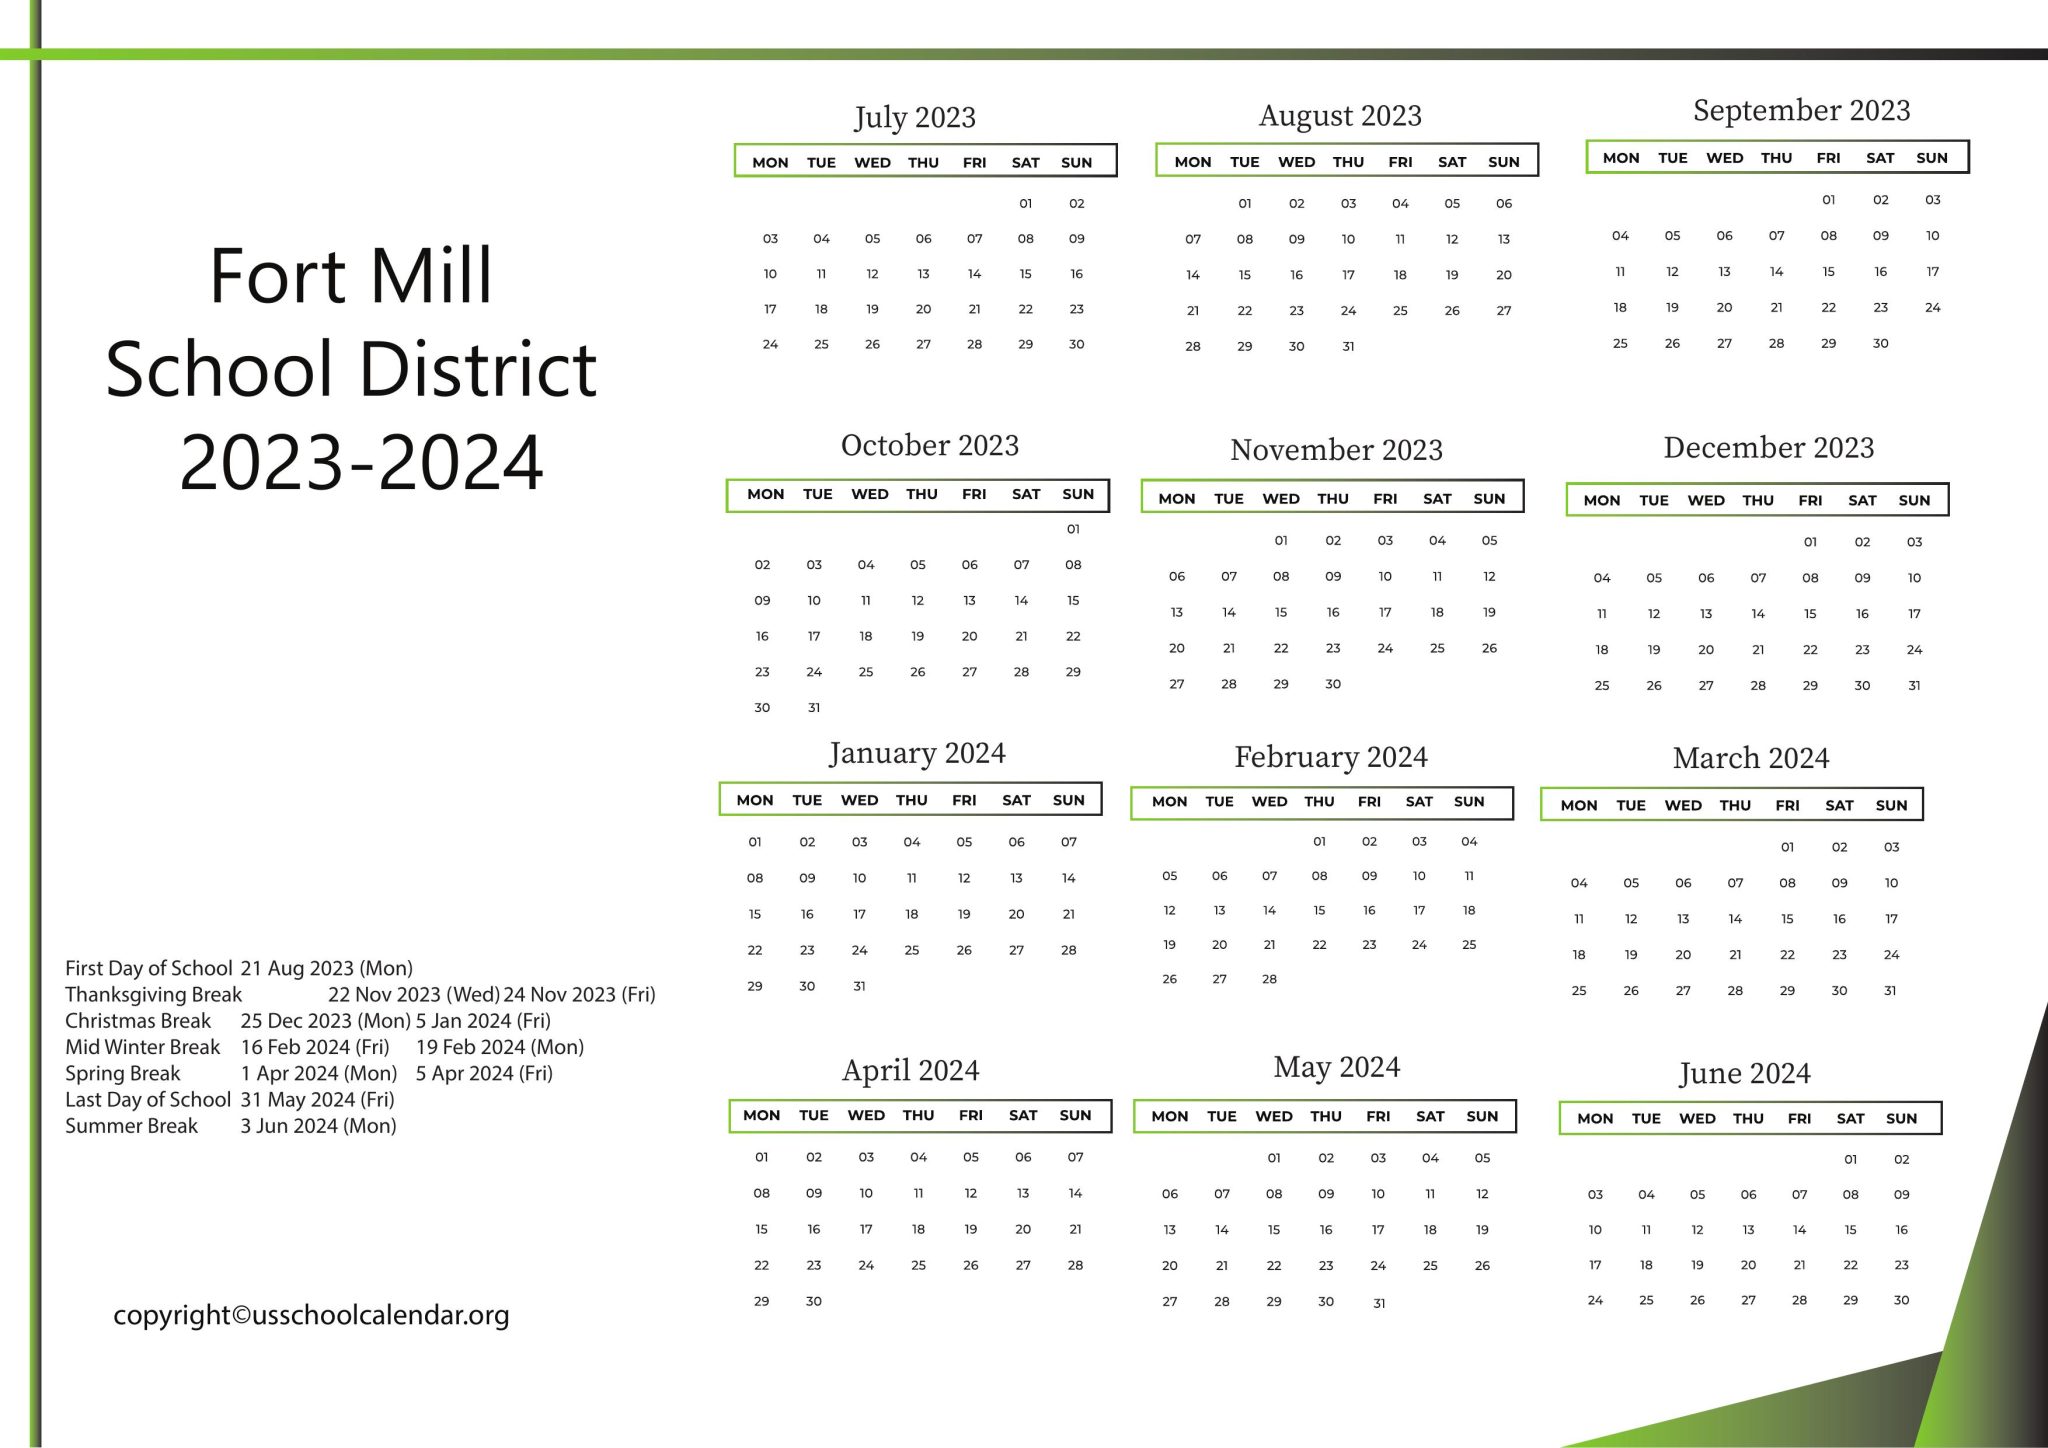 fort-mill-school-district-calendar-with-holidays-2023-2024